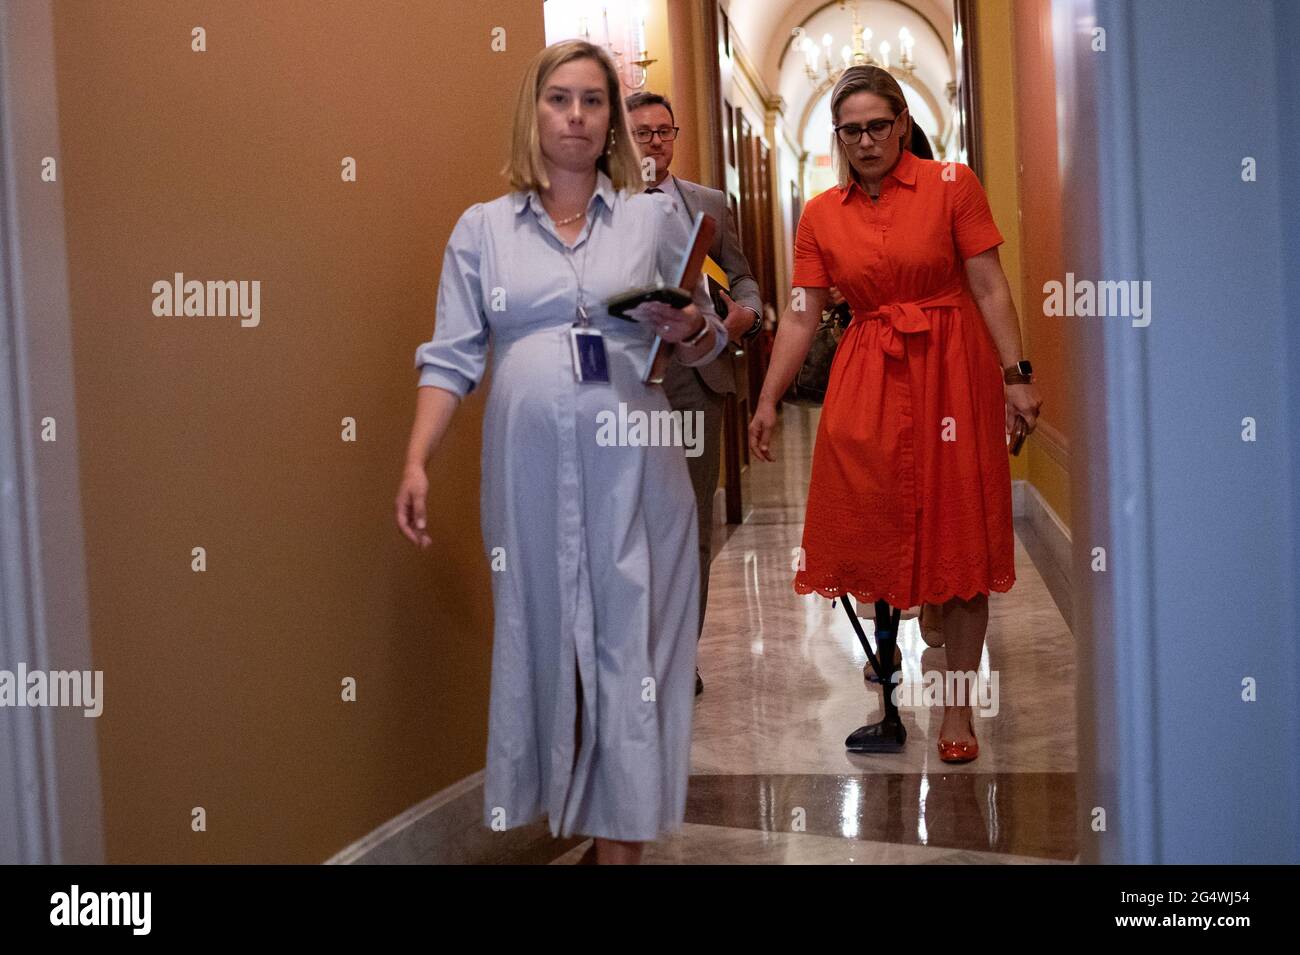 Washington, USA. 23rd June, 2021. Senator Kyrsten Sinema (D-AZ) leaves a bipartisan meeting of Senators where they discussed infrastructure legislation, at the U.S. Capitol, in Washington, DC, on Wednesday, June 23, 2021. Last night Senate Republicans filibustered a voting rights bill as bipartisan negotiations over infrastructure legislation grind on with little apparent progress building a package to beat the 60-vote filibuster threshold. (Graeme Sloan/Sipa USA) Credit: Sipa USA/Alamy Live News Stock Photo